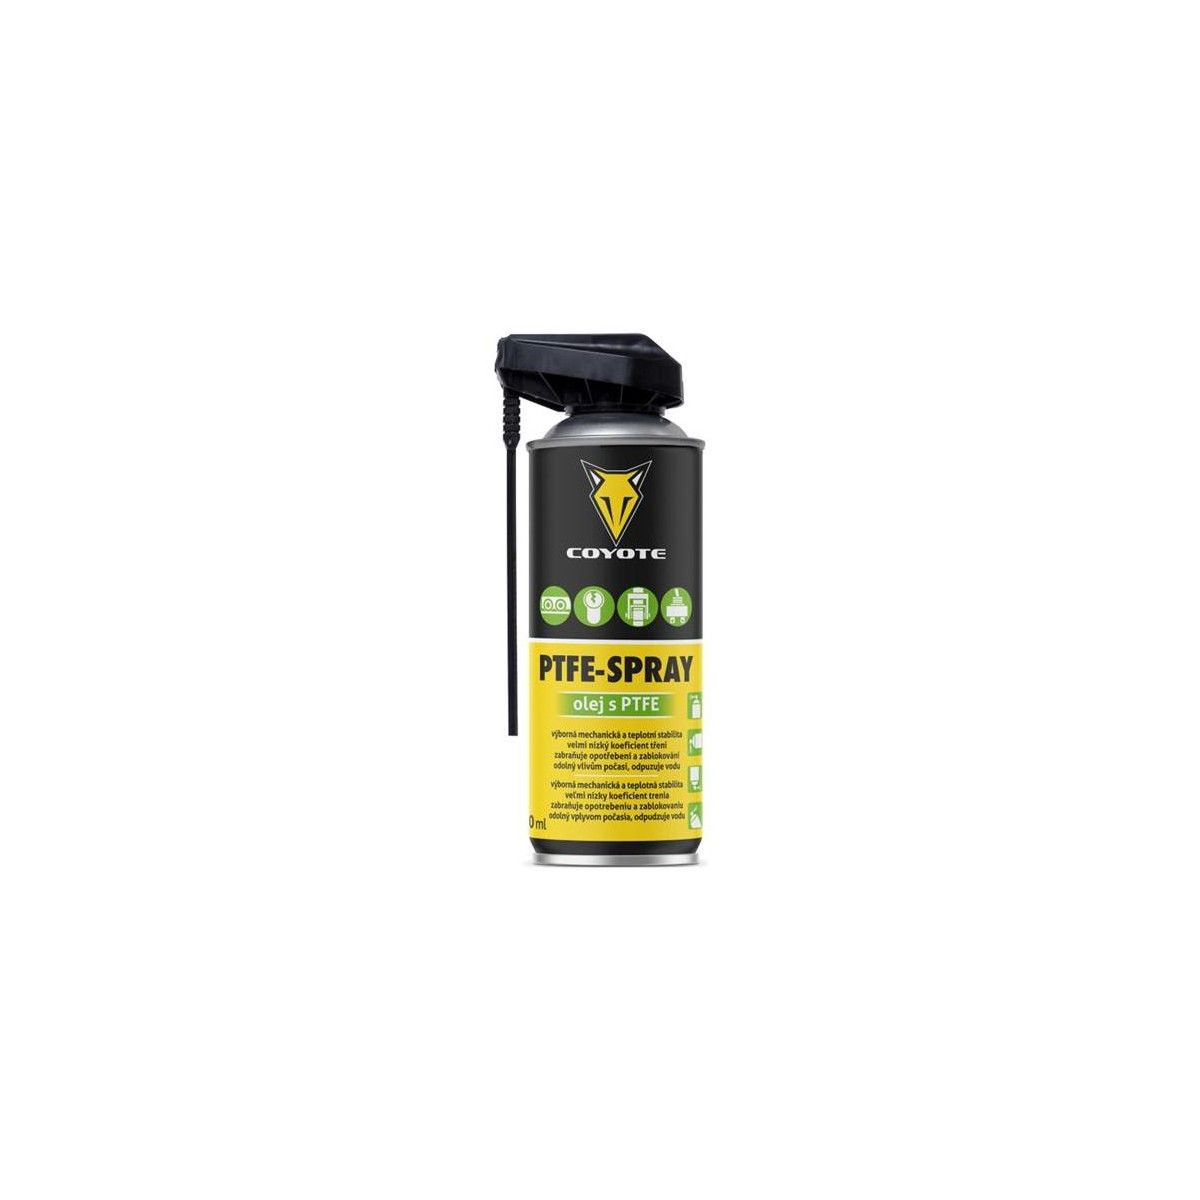 More about Chemie PTFE-SPRAY COYOTE 90722 400ml